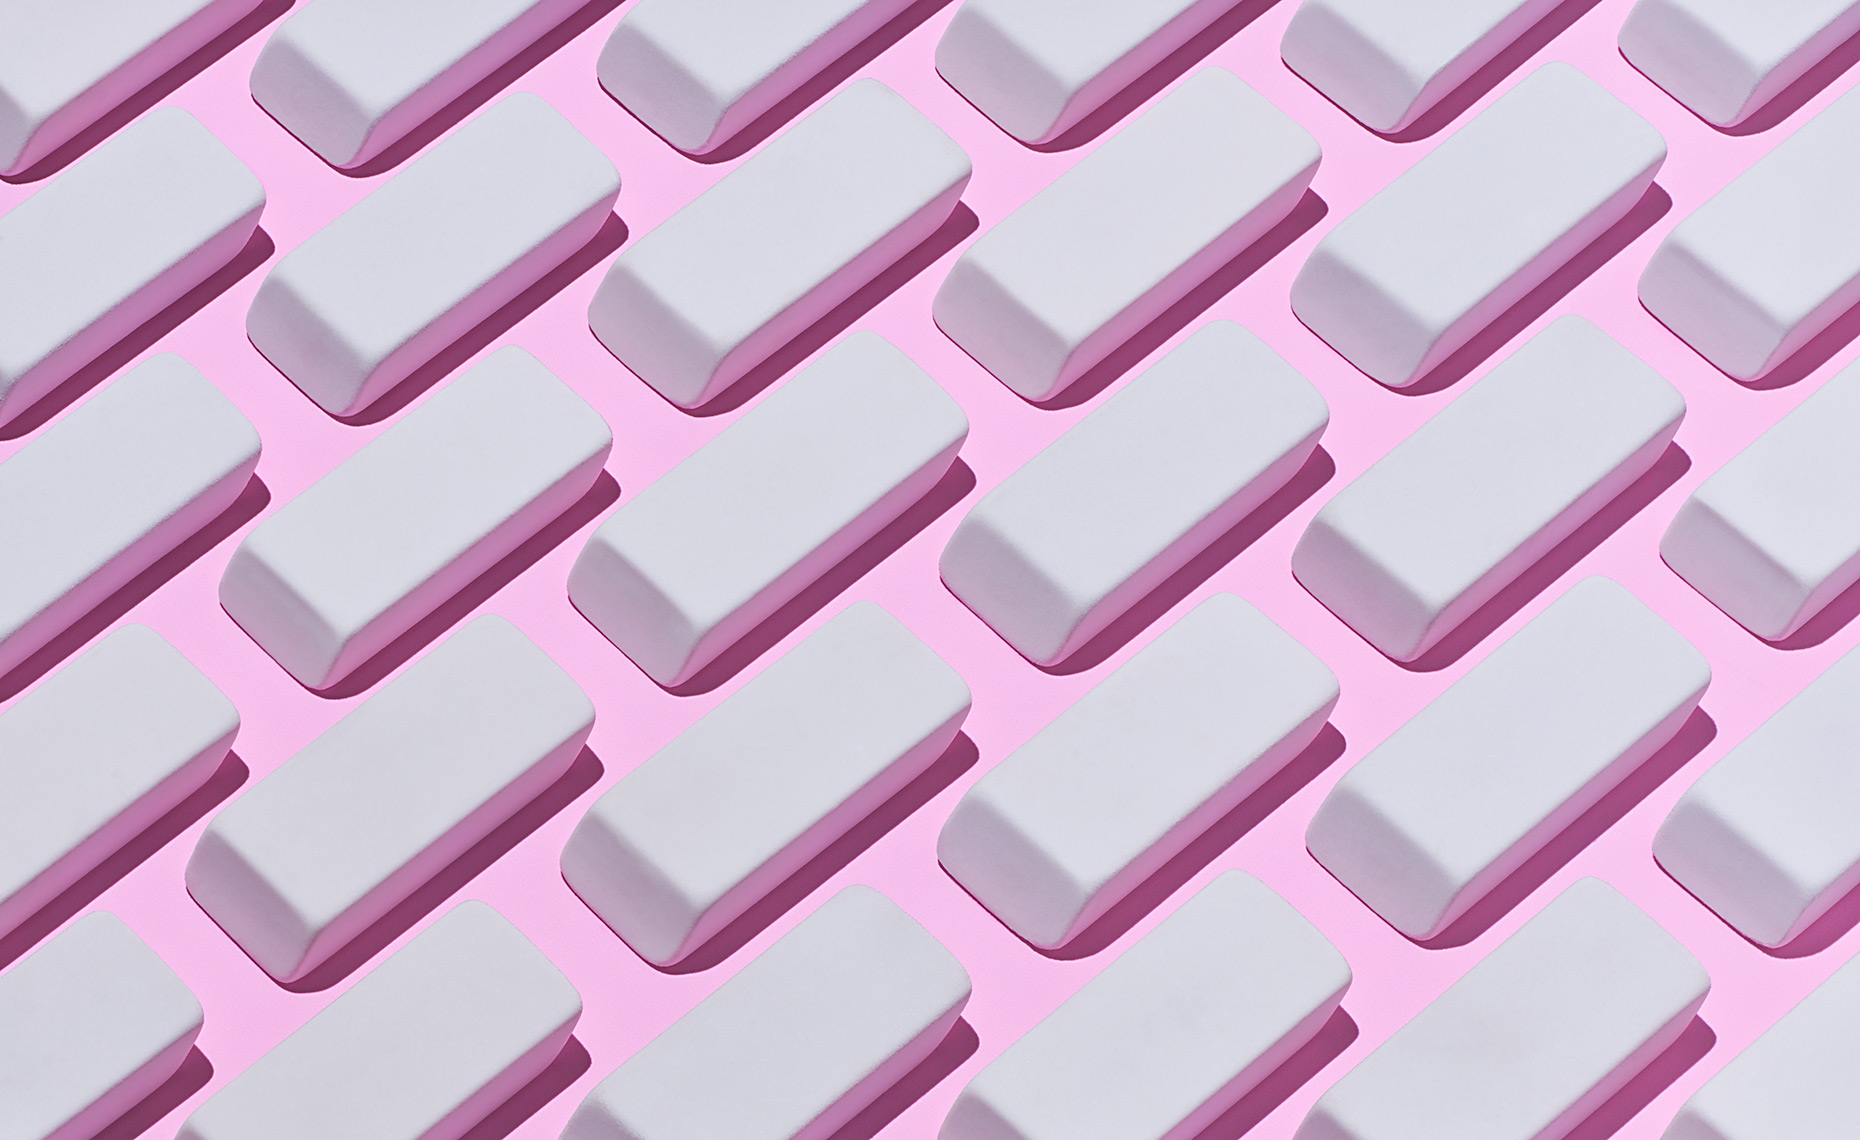 Erasers on Pink, Greg Shapps, Shapps Photography, LLC.